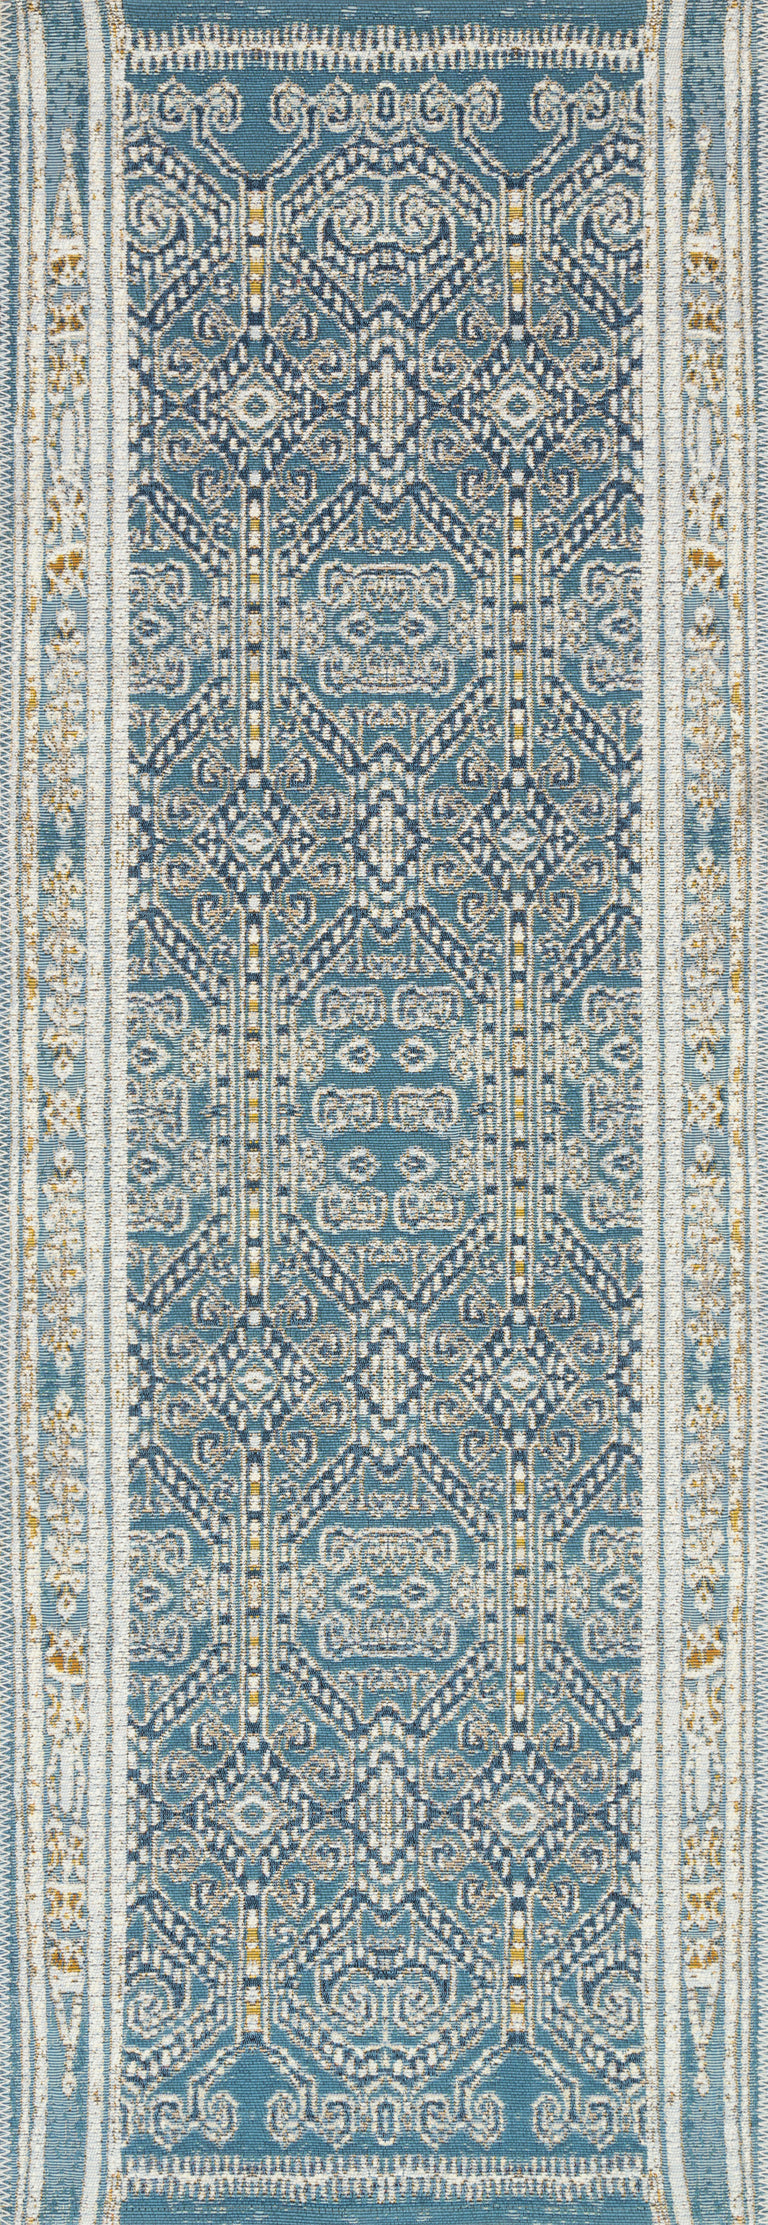 Loloi Rugs Mika Collection Rug in Ocean - 10'6" x 13'9"